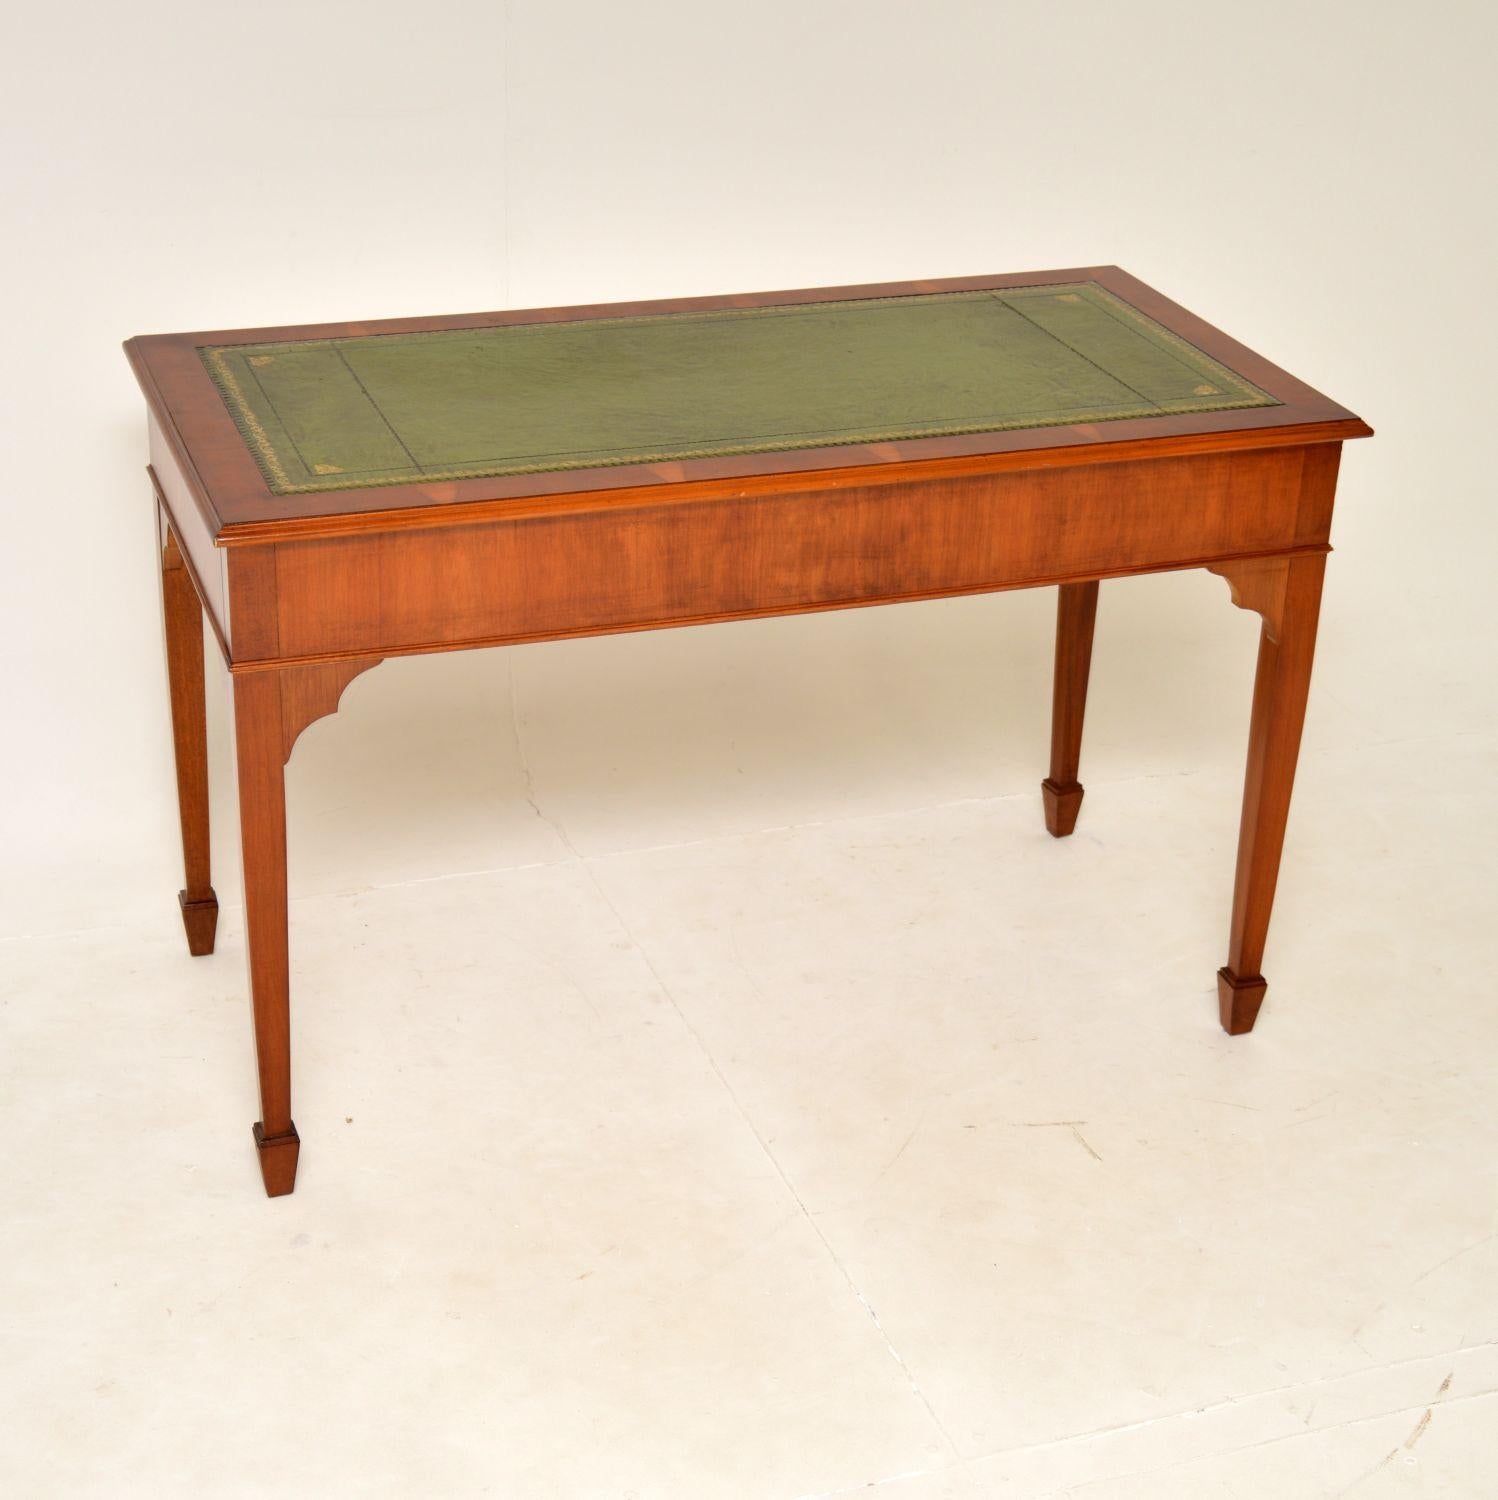 Mid-20th Century Antique Georgian Style Yew Wood Leather Top Desk / Writing Table